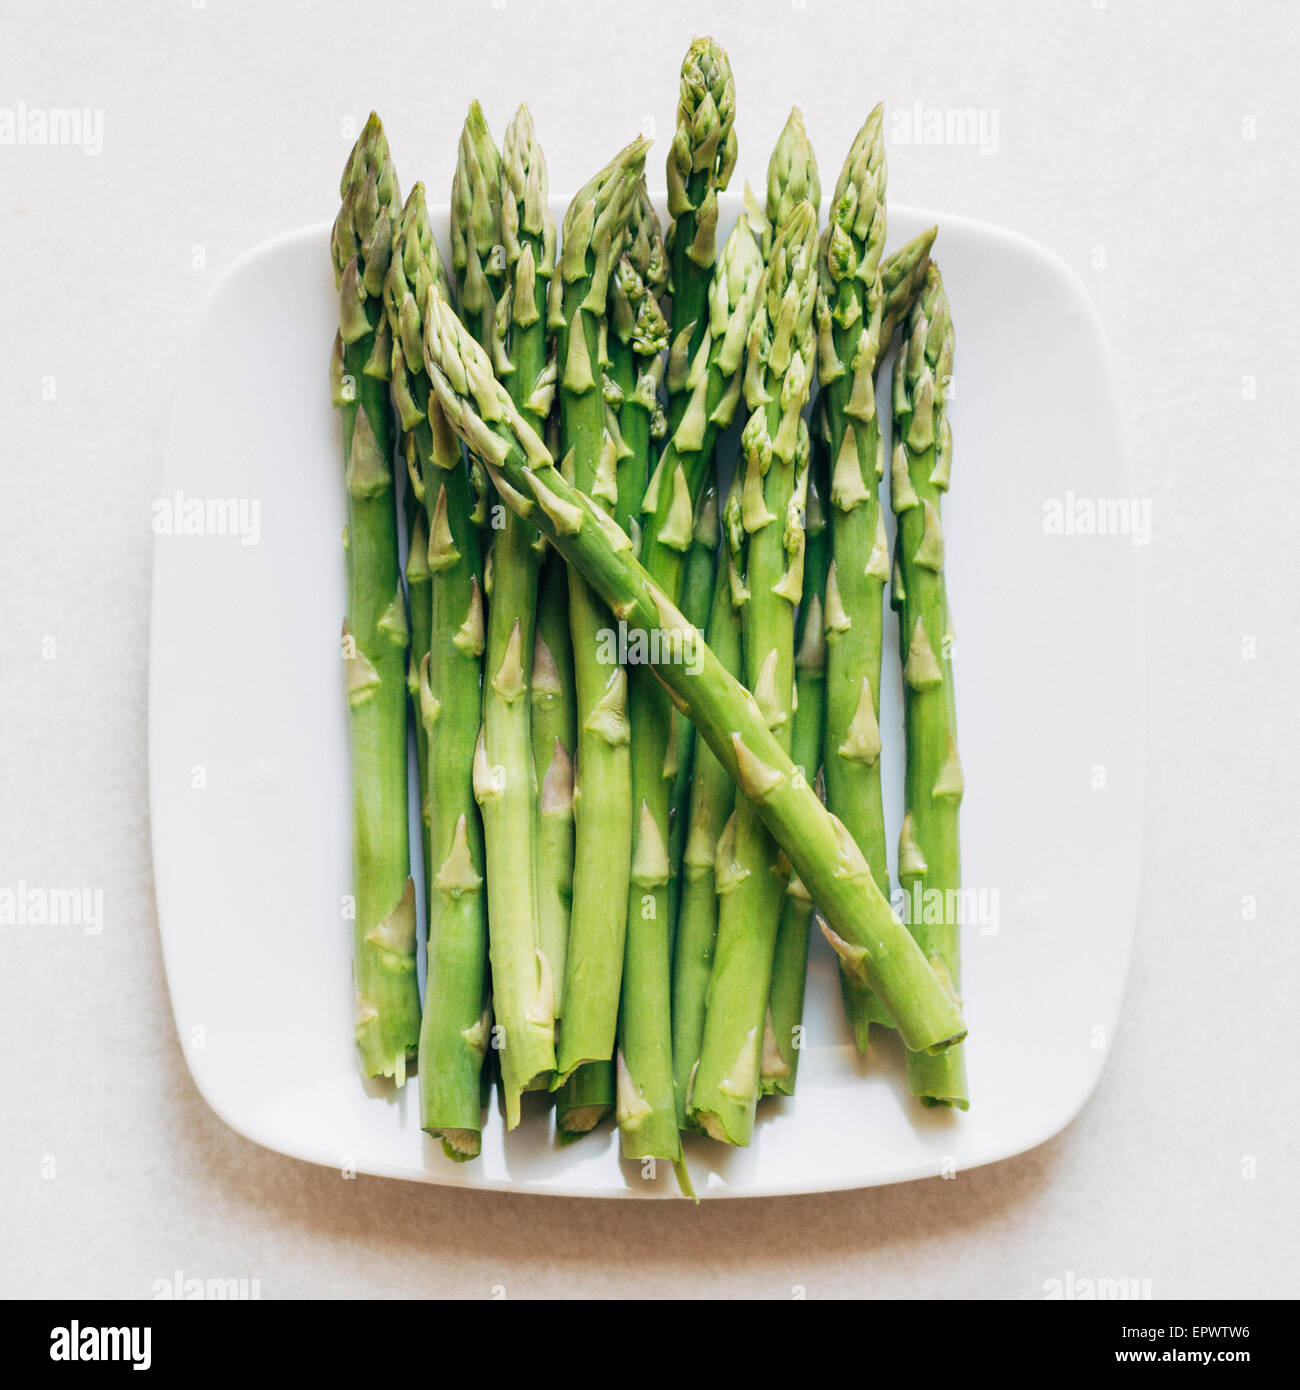 Plate filled with raw asparagus Stock Photo